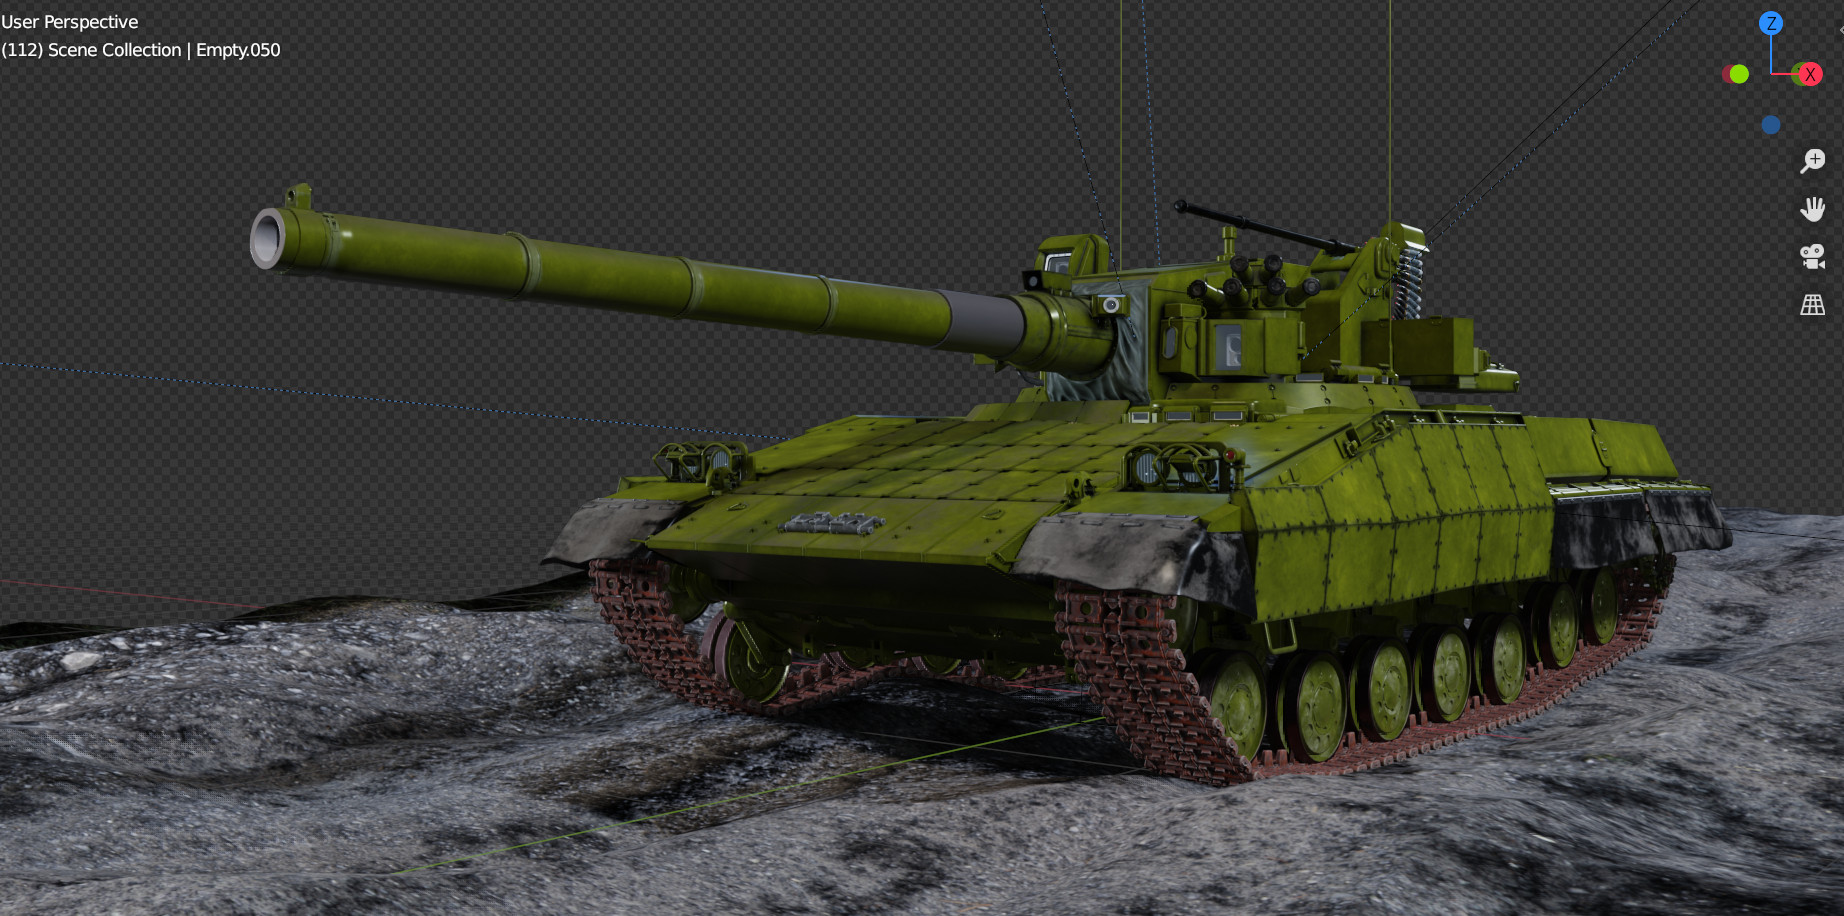 Rendering of Object 477 by the xmszeon.